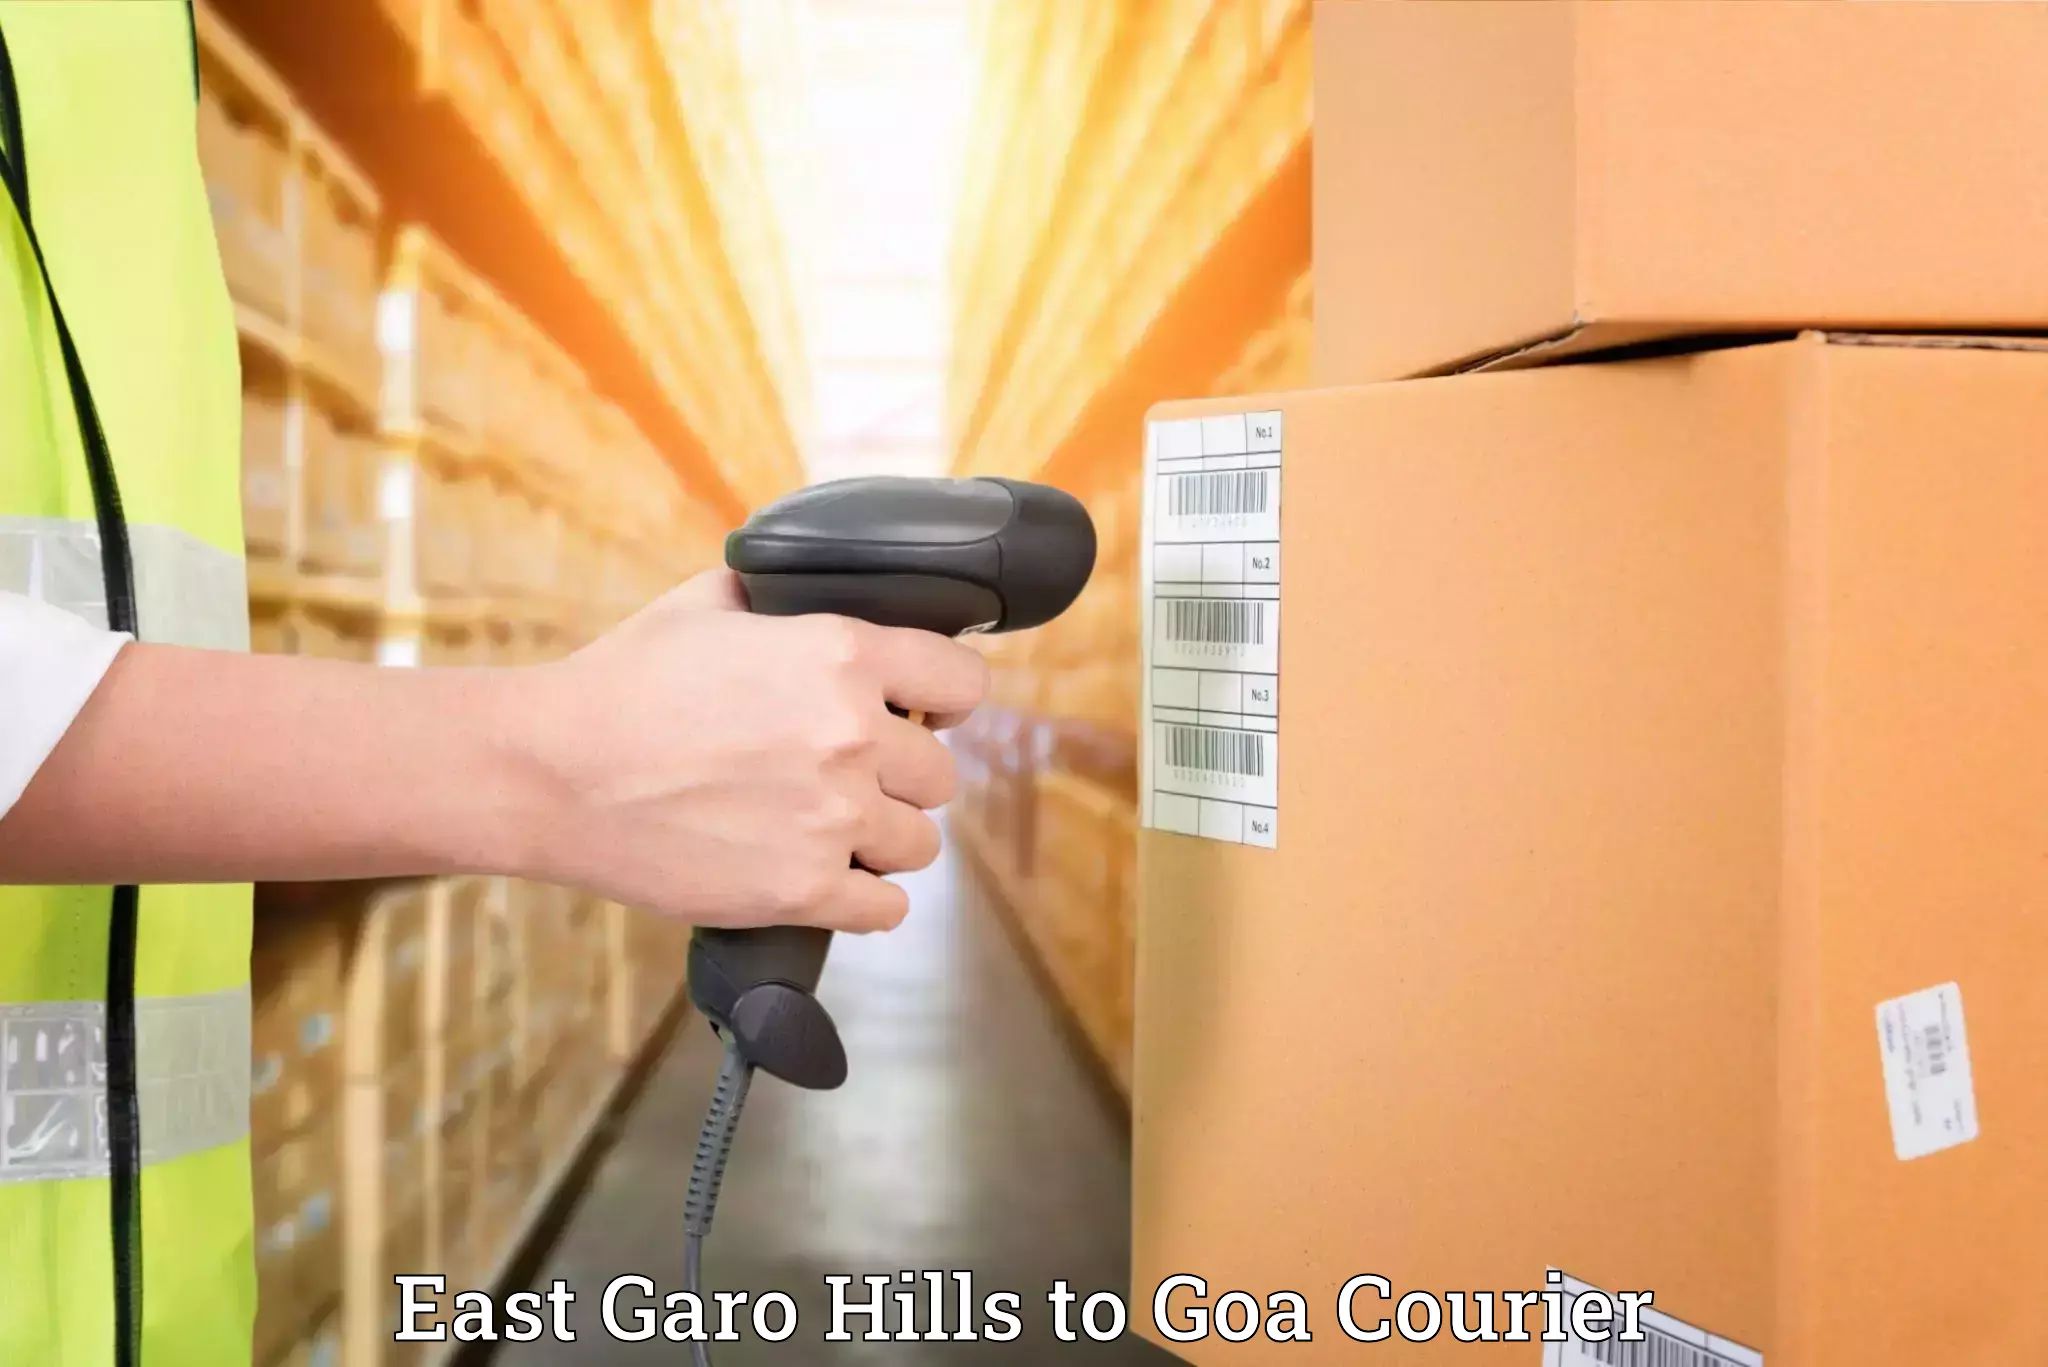 Furniture relocation experts East Garo Hills to South Goa